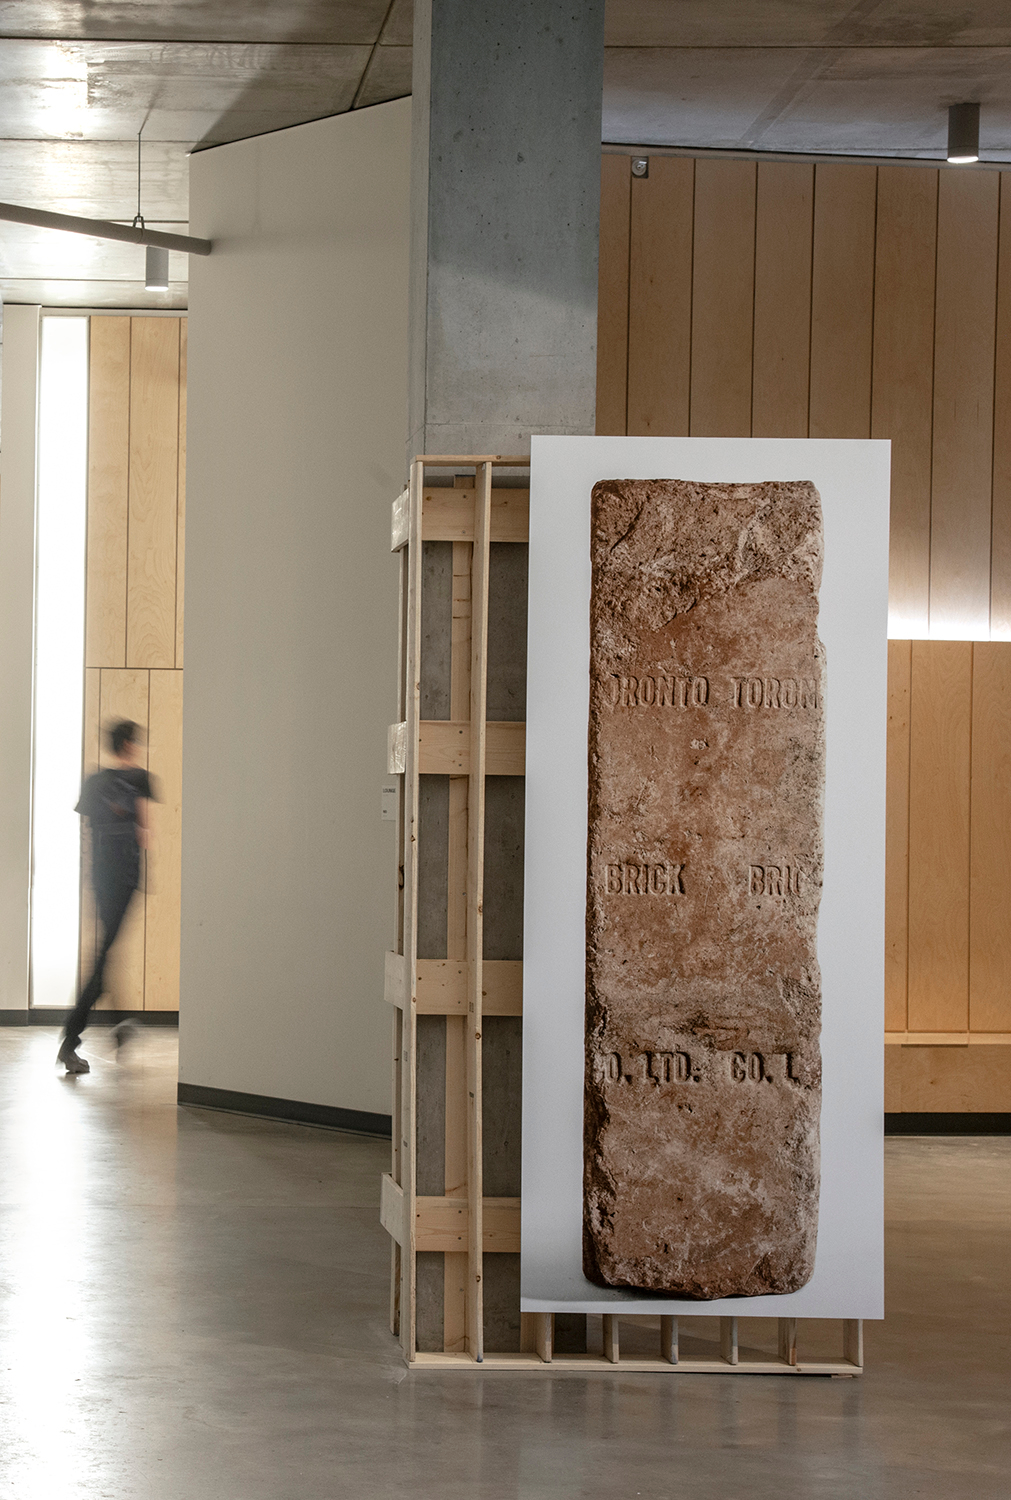     Susan Dobson, Back/Fill, Installation at Daniels Faculty of Architecture, Landscape, and Design, Toronto, 2019. Photo: Susan Dobson. Courtesy CONTACT, the artist.

